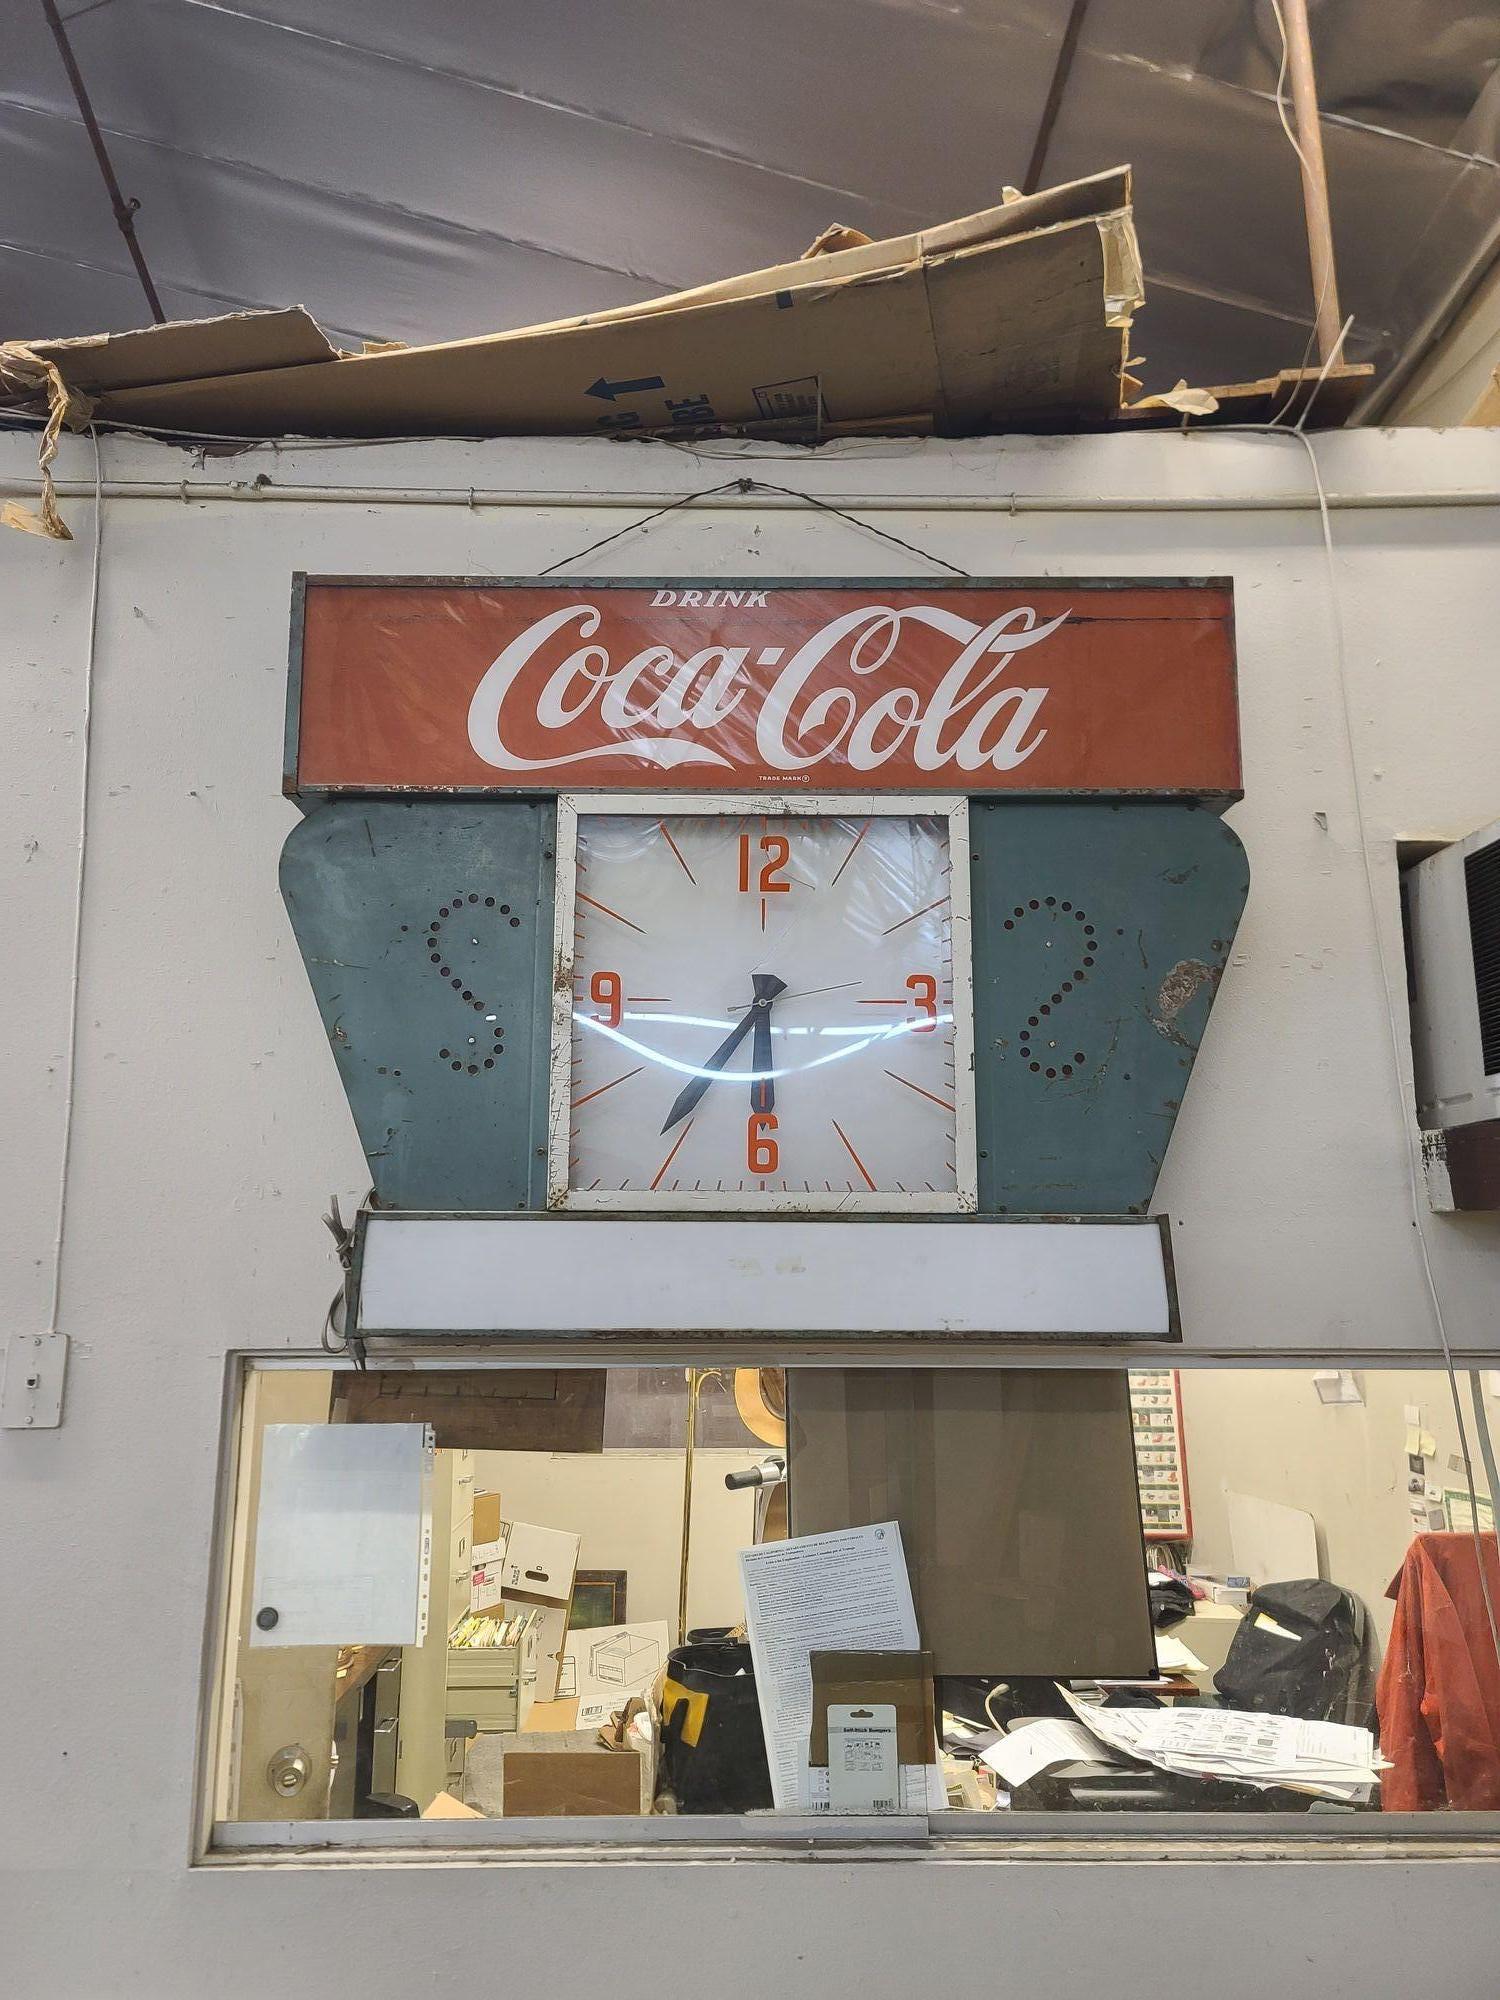 Transport yourself to the 1950s with this iconic 4' tall Coca-Cola Collectible Wall Clock. Crafted to perfection, it's a nostalgic masterpiece that oozes vintage charm. The classic Coca-Cola logo and retro design evoke the spirit of a bygone era,